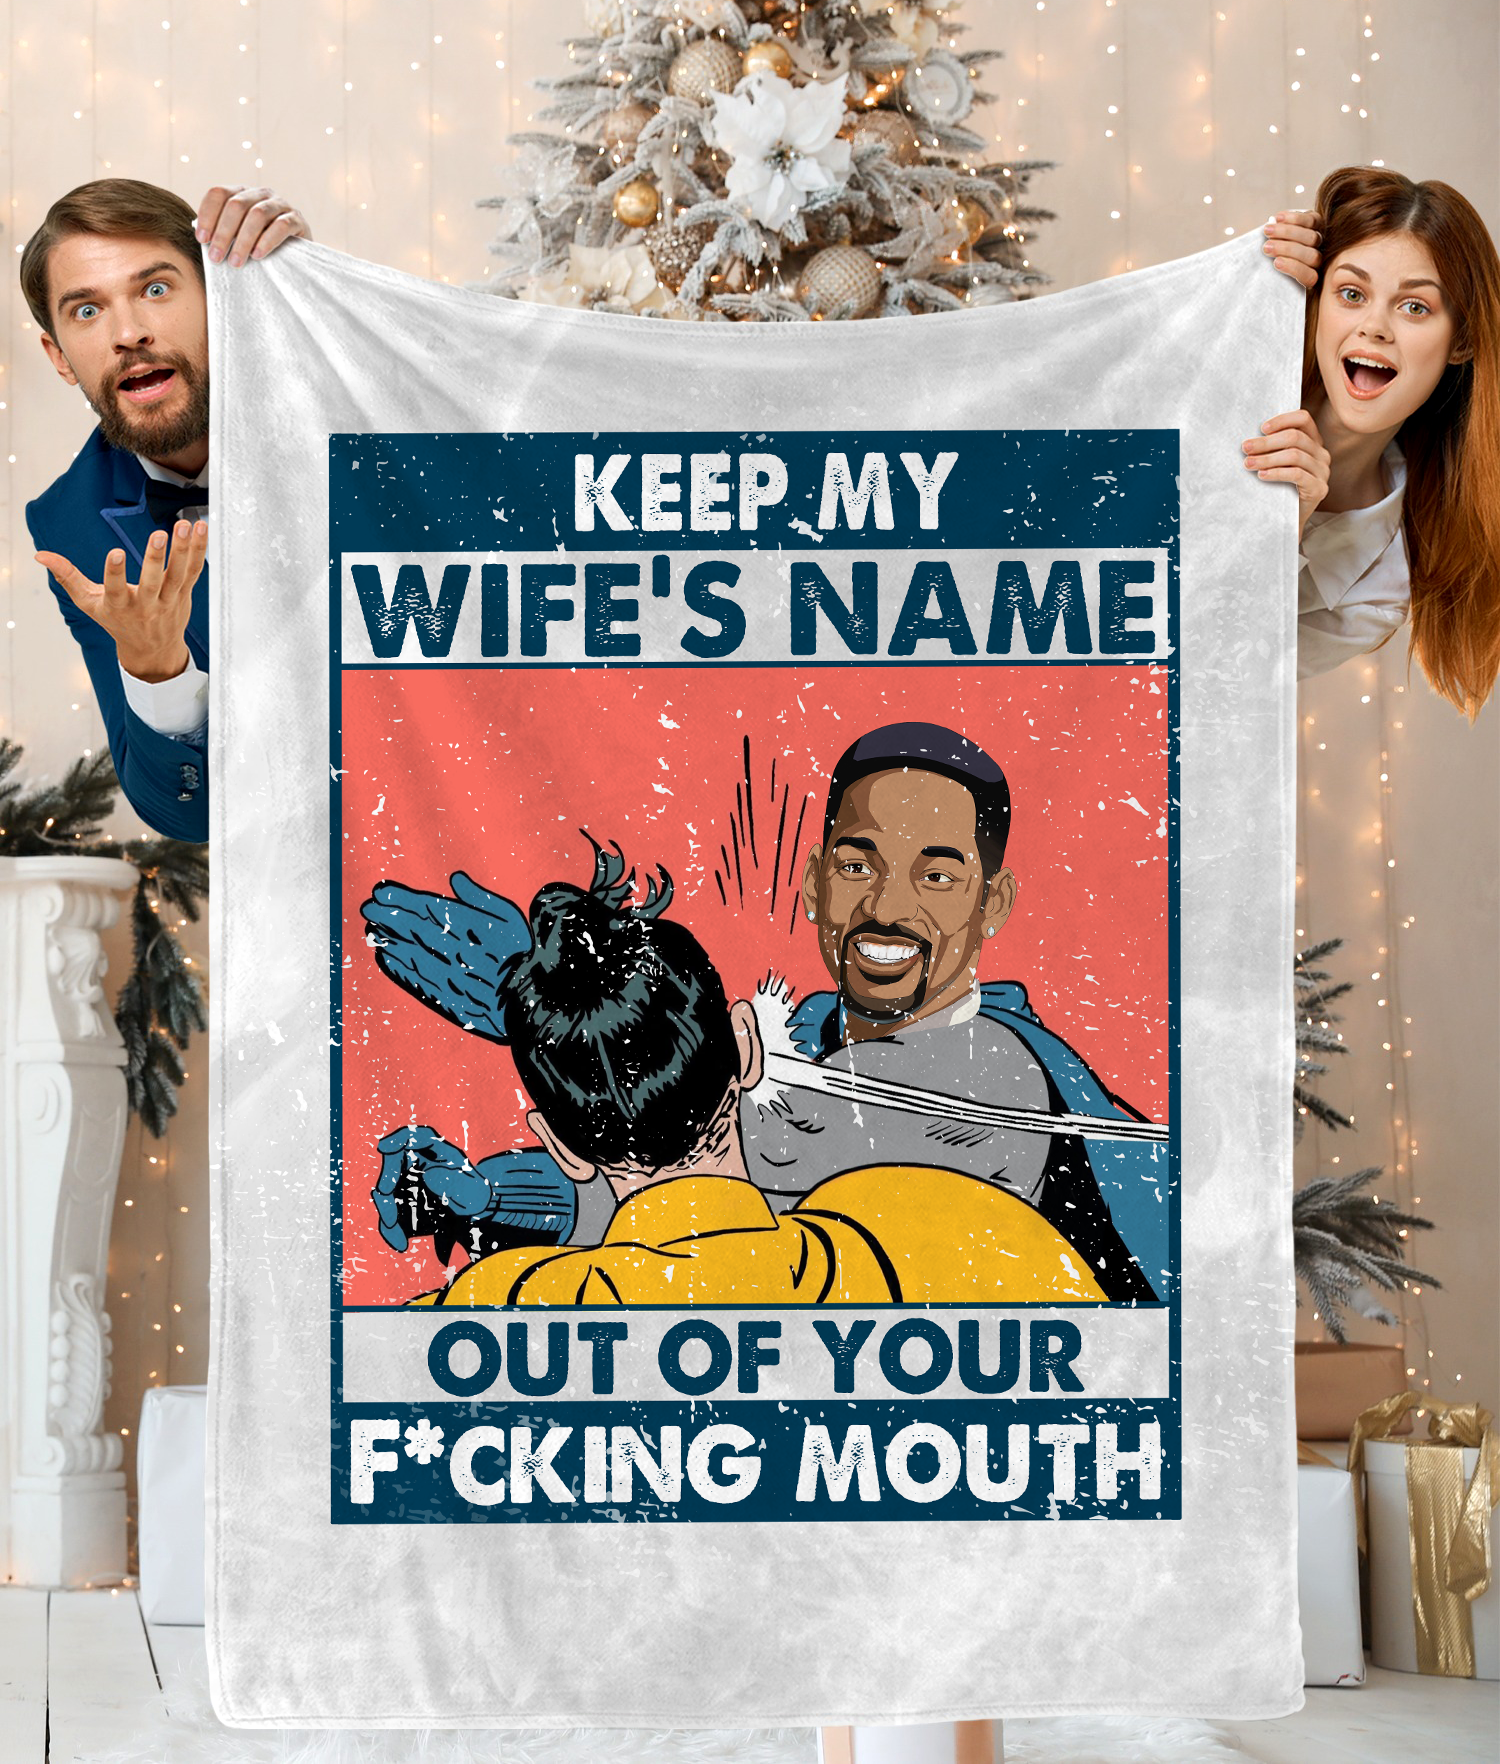 Keep My Wife’s Name Out Your Mouth,Will Smith, Oscar 2022 - Blanket